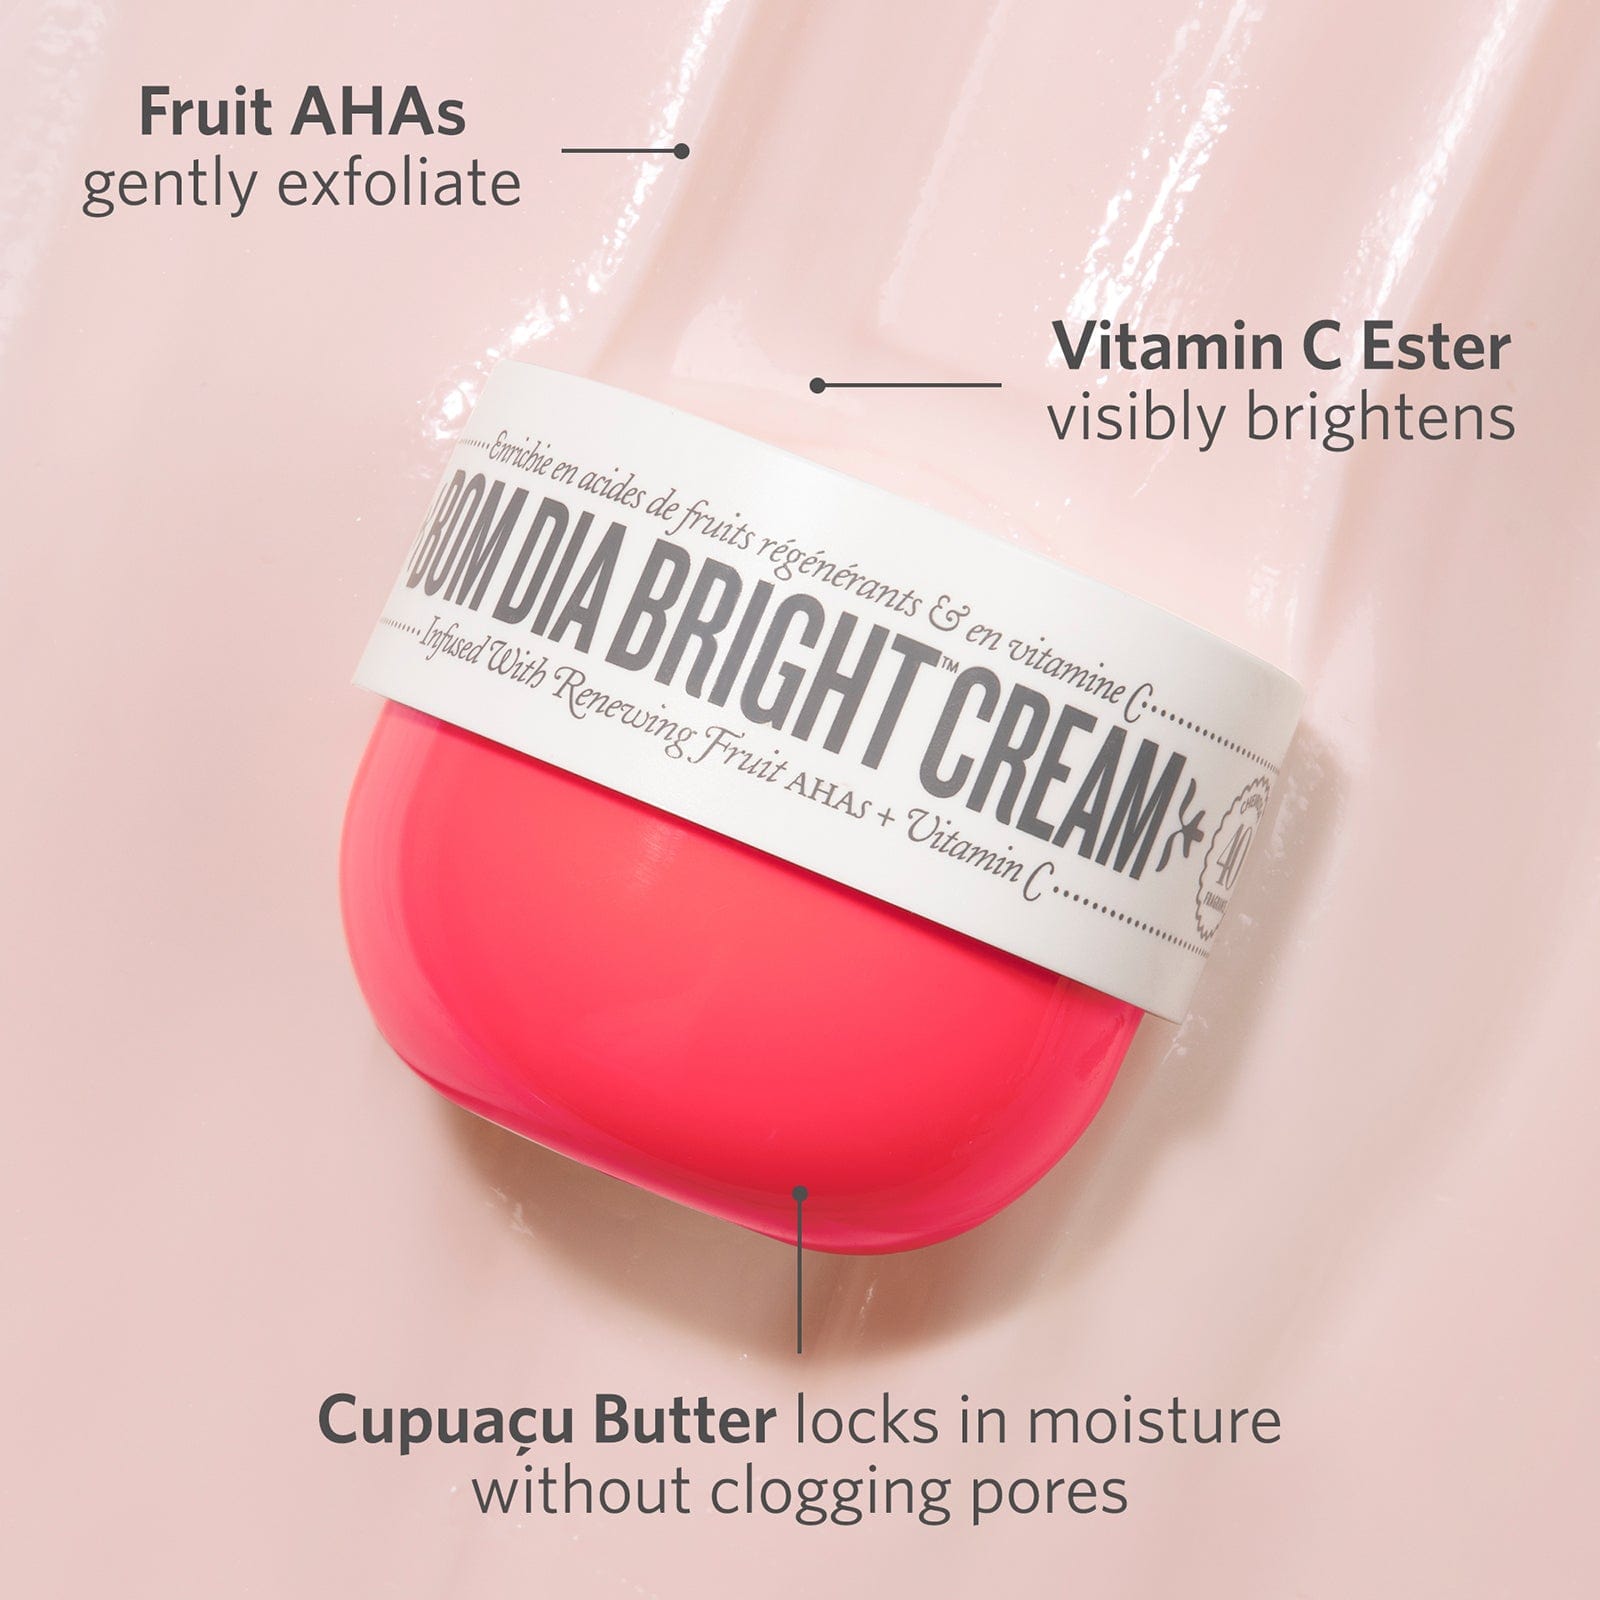 Vitamin C Ester: visibly brightens - Fruit AHAs: gently exfoliate - Cupuaçu Butter locks in moisture with clogging pores